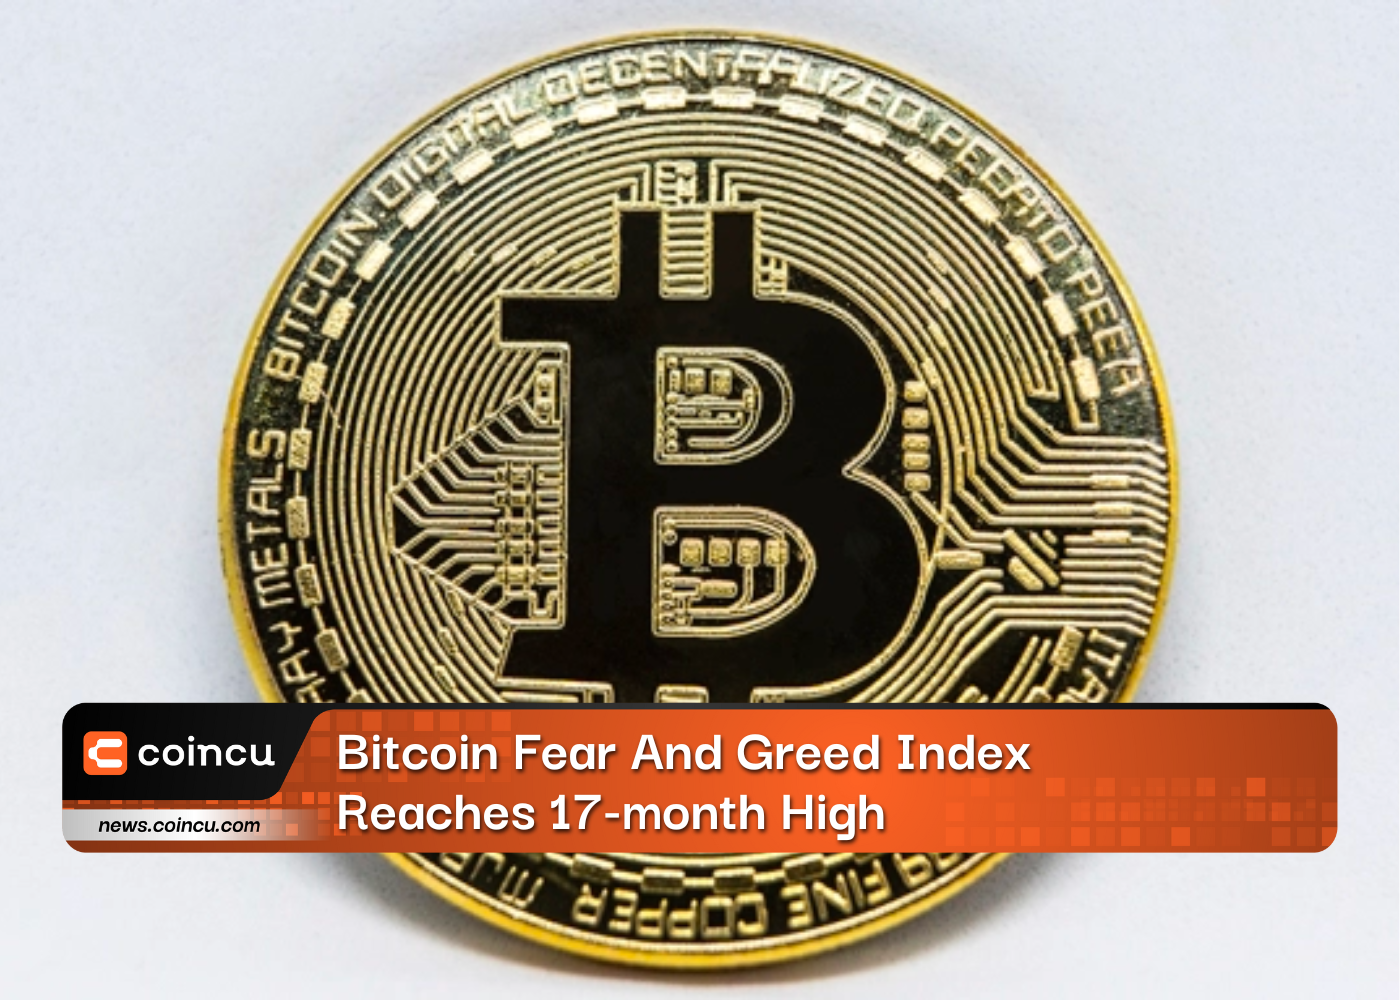 Bitcoin Fear And Greed Index Reaches 17-month High